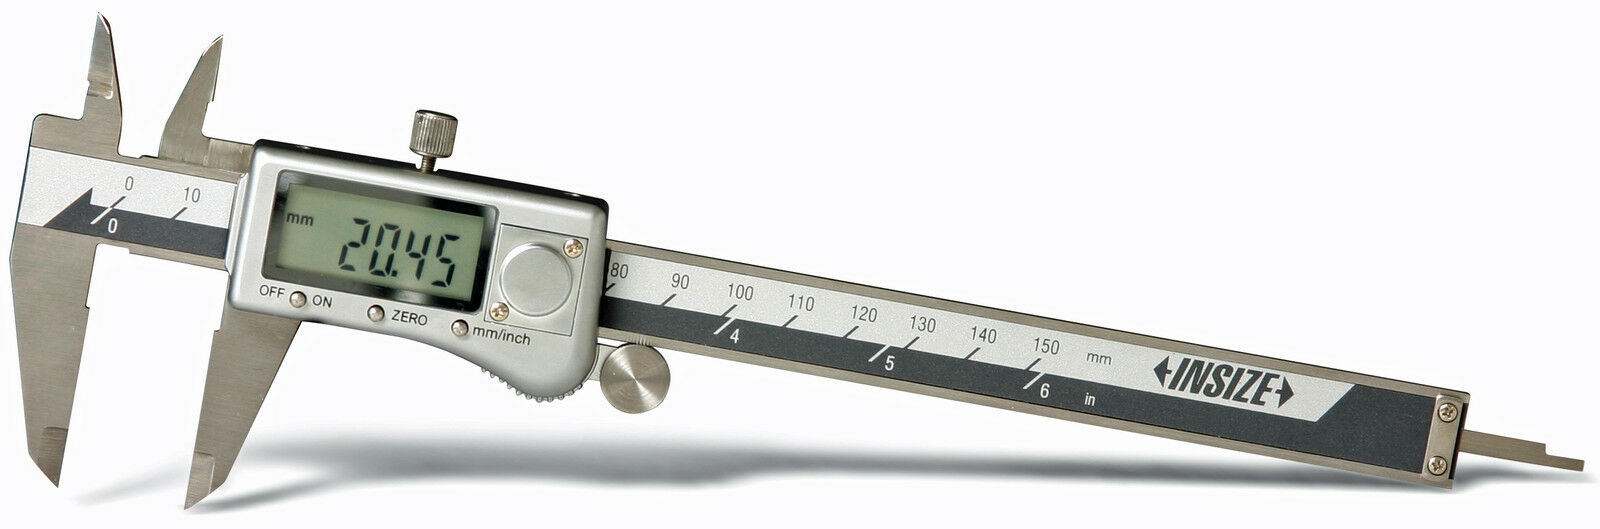 INSIZE 1114-150A Electronic Caliper with Alloy Case 0-150mm/0-6in